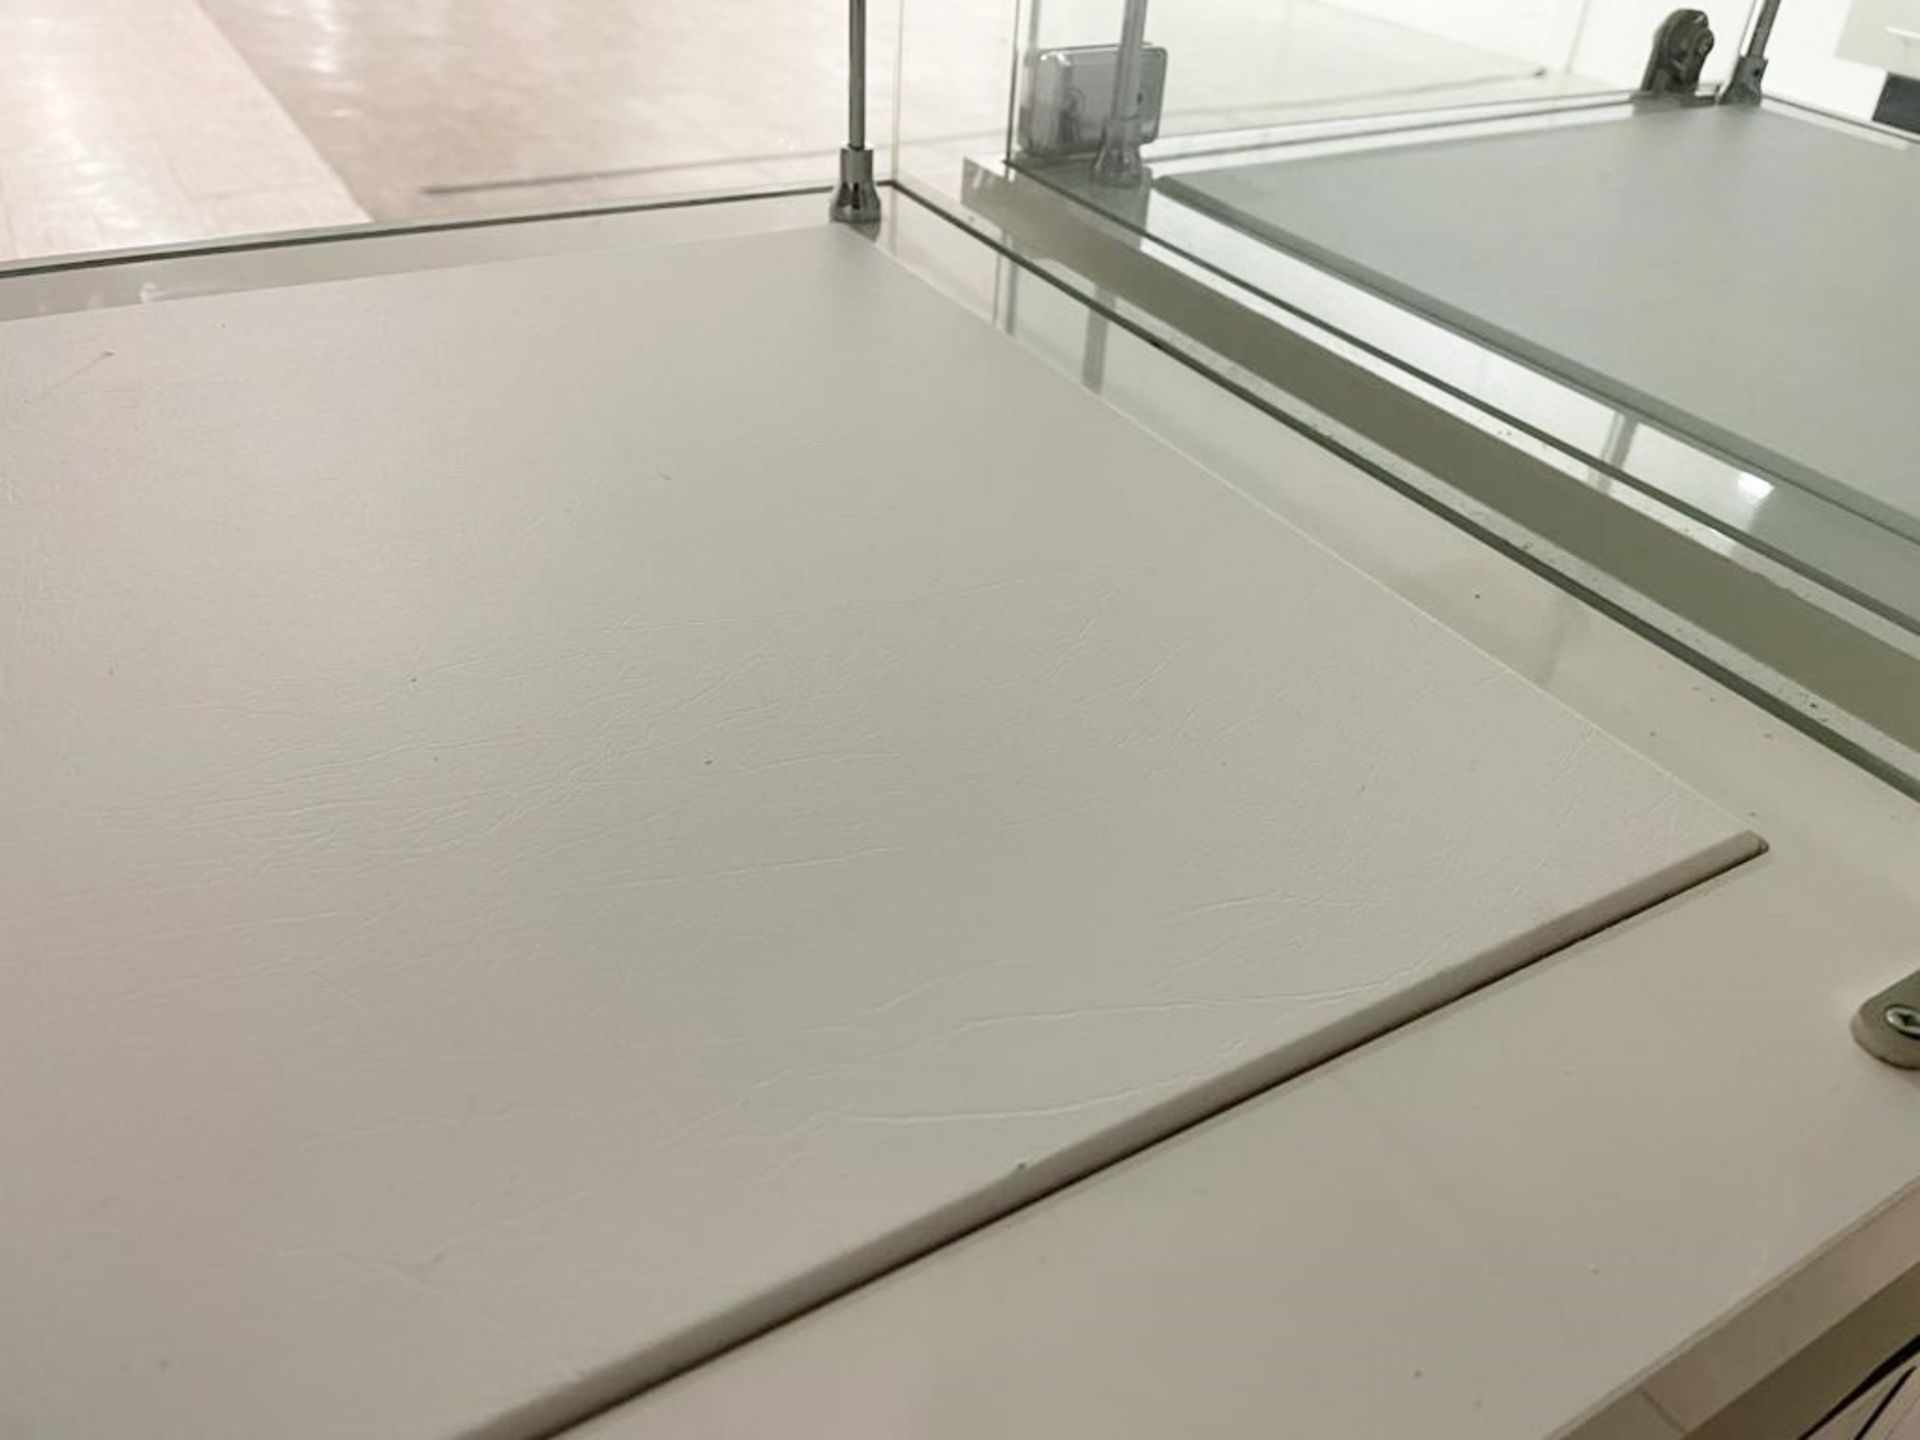 8 x Retail Glass Display Case Counter Cabinets - Features White Gloss Finish, Safety Glass, Internal - Image 4 of 13